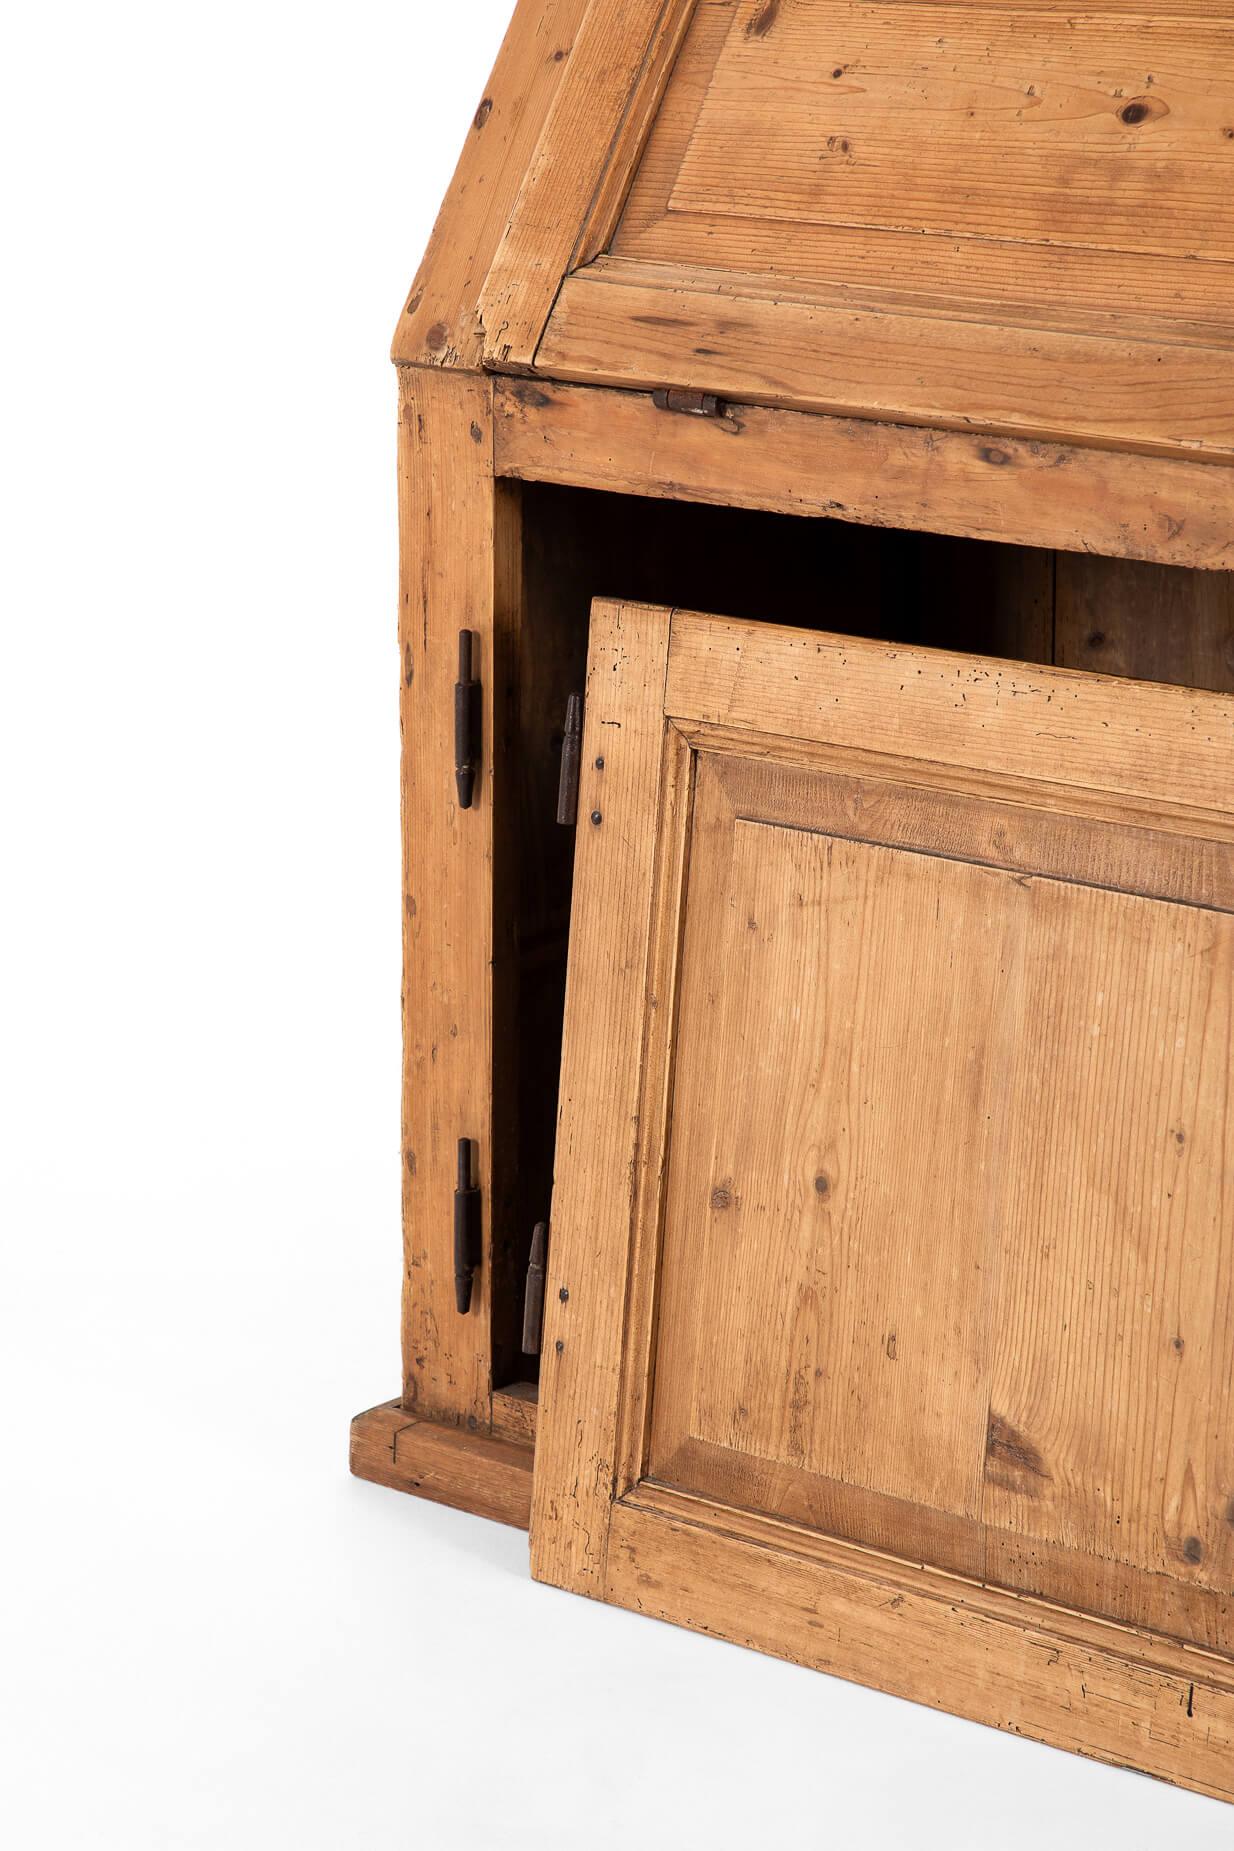 Pine 19th century dresser and secretaire For Sale